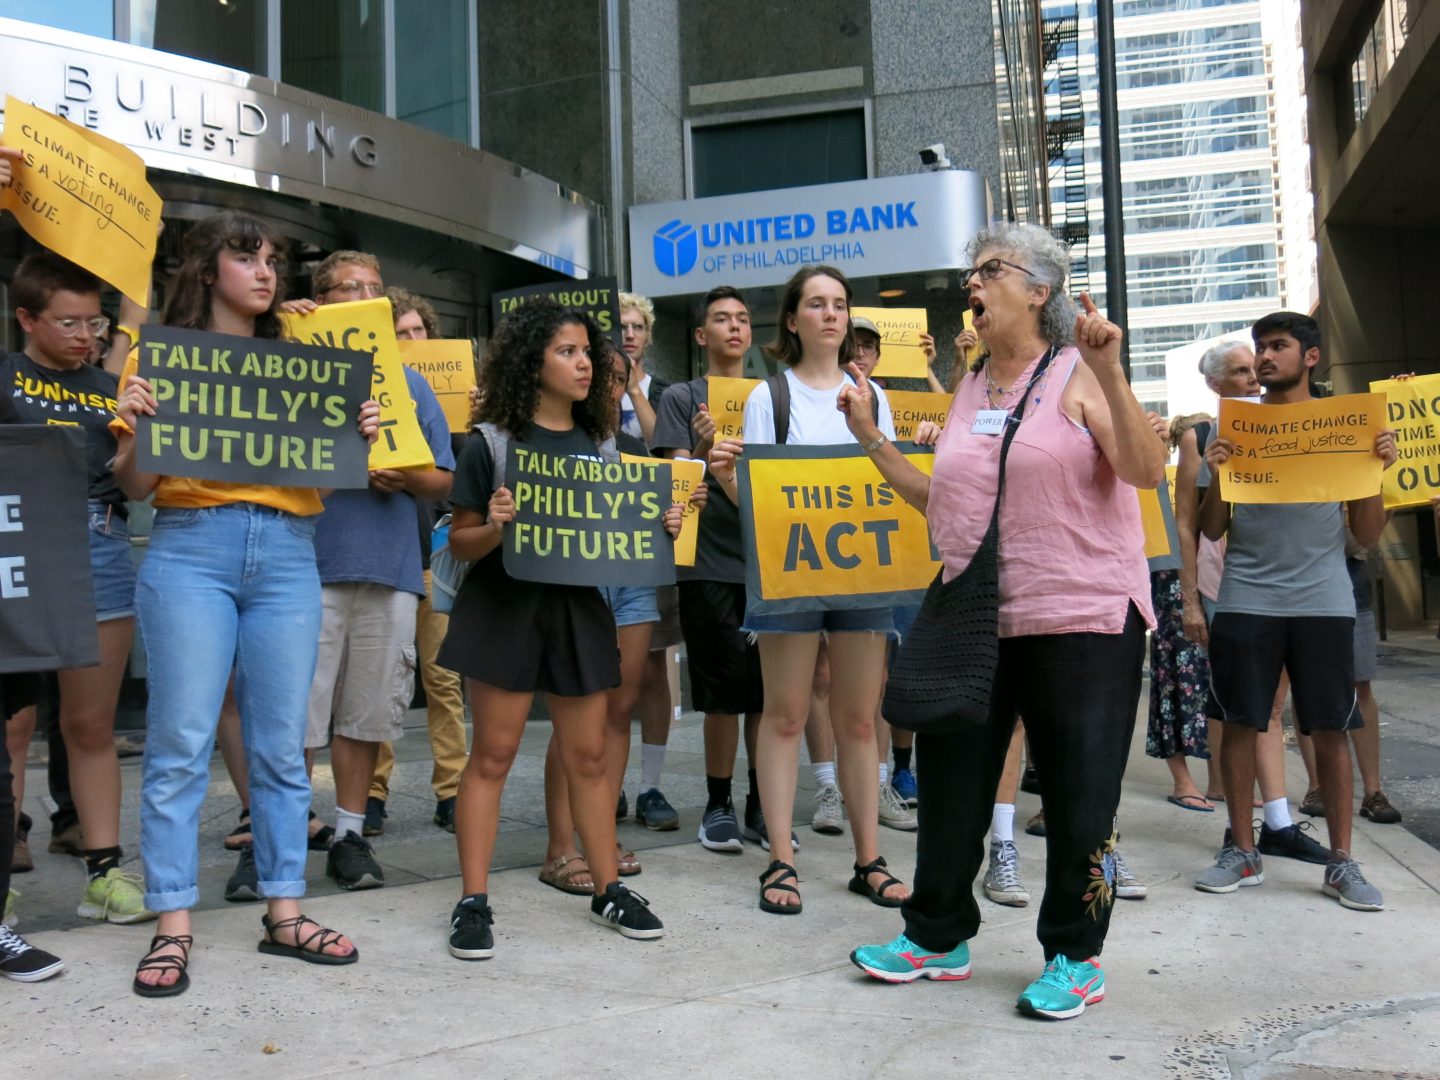 The Sunrise Movement has organized protests like this one in July in Philadelphia to pressure the Democratic National Committee to hold a primary debate focused on climate change.